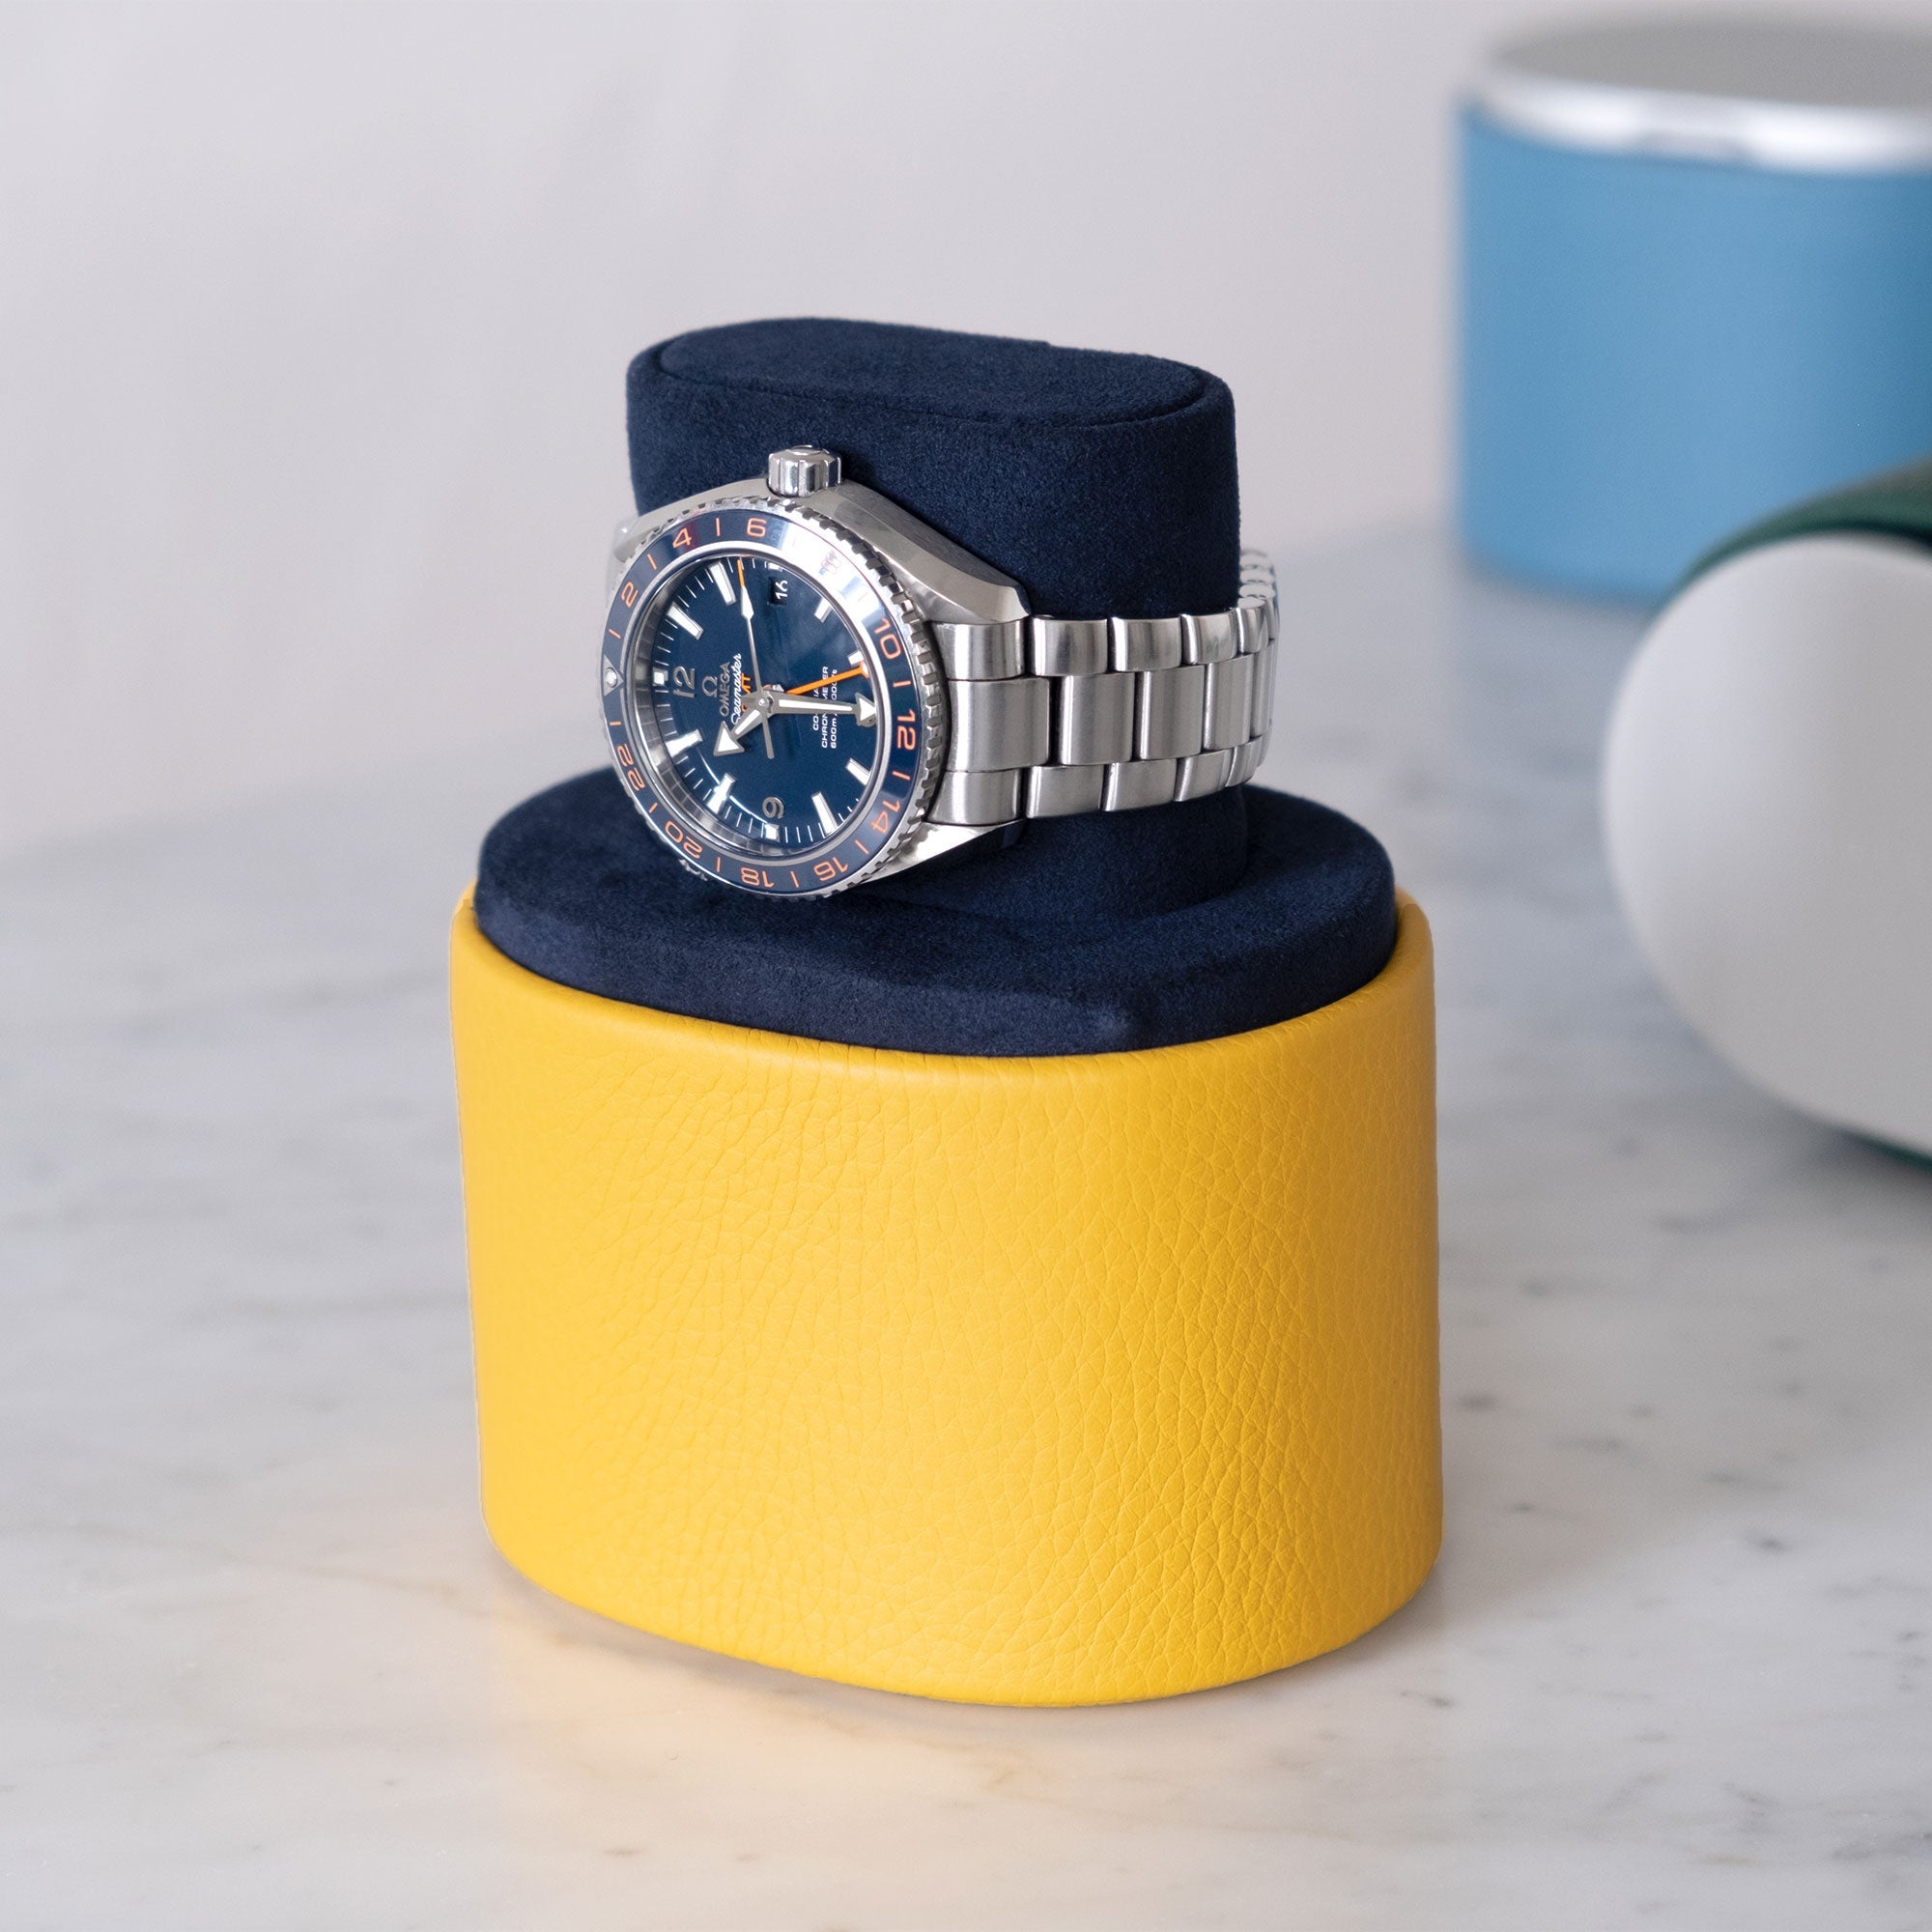 Lifestyle shot of handmade Theo watch roll in sunflower leather and deep blue interior holding Omega Seamaster Planet Ocean 600M Good Planet luxury watch